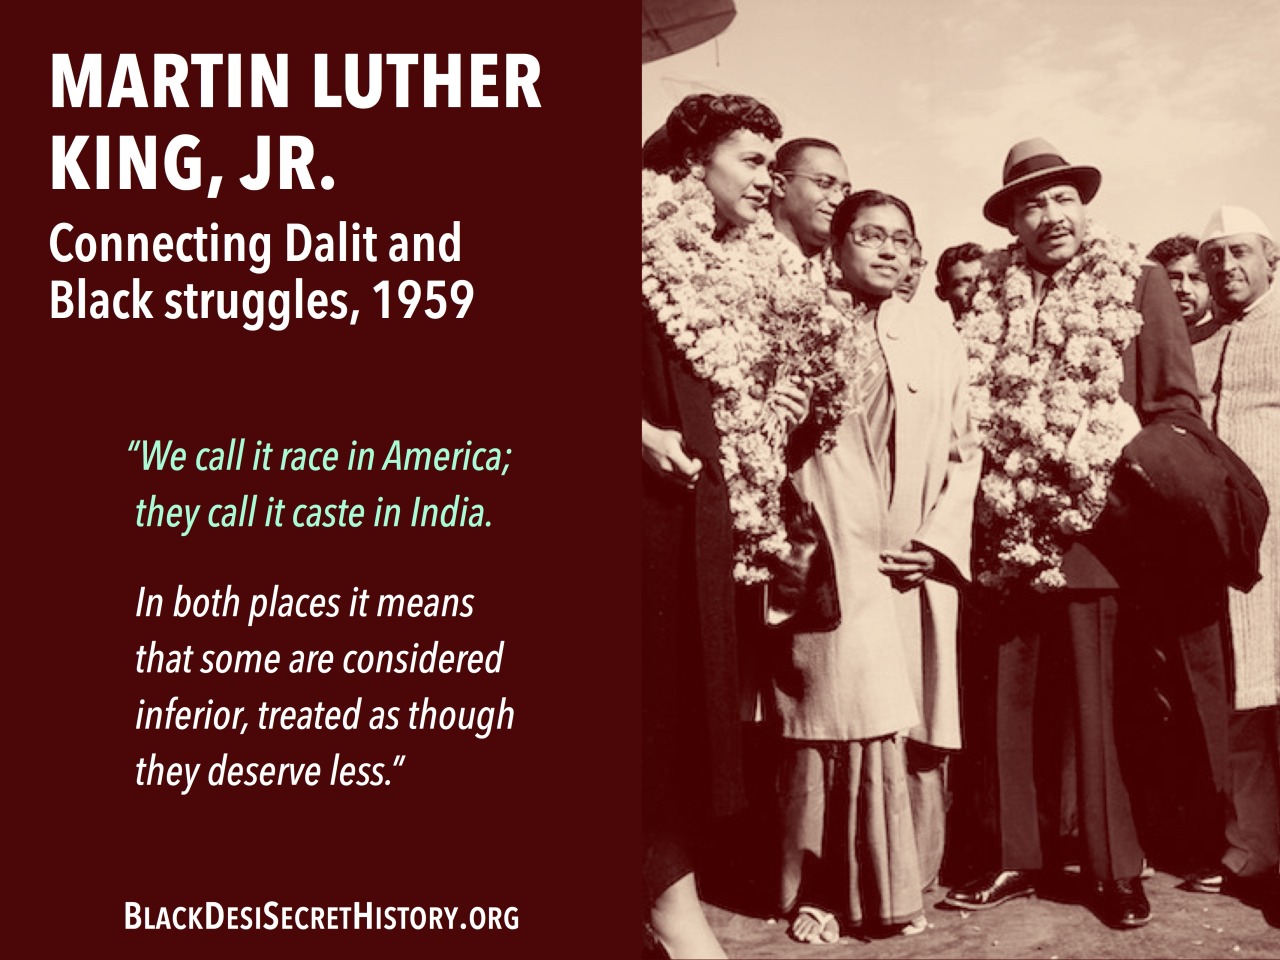 MARTIN LUTHER KING, JR., Connecting Dalit and Black struggles, 1959: “We call it race in America; they call it caste in India. In both places it means that some are considered inferior, treated as though they deserve less.”